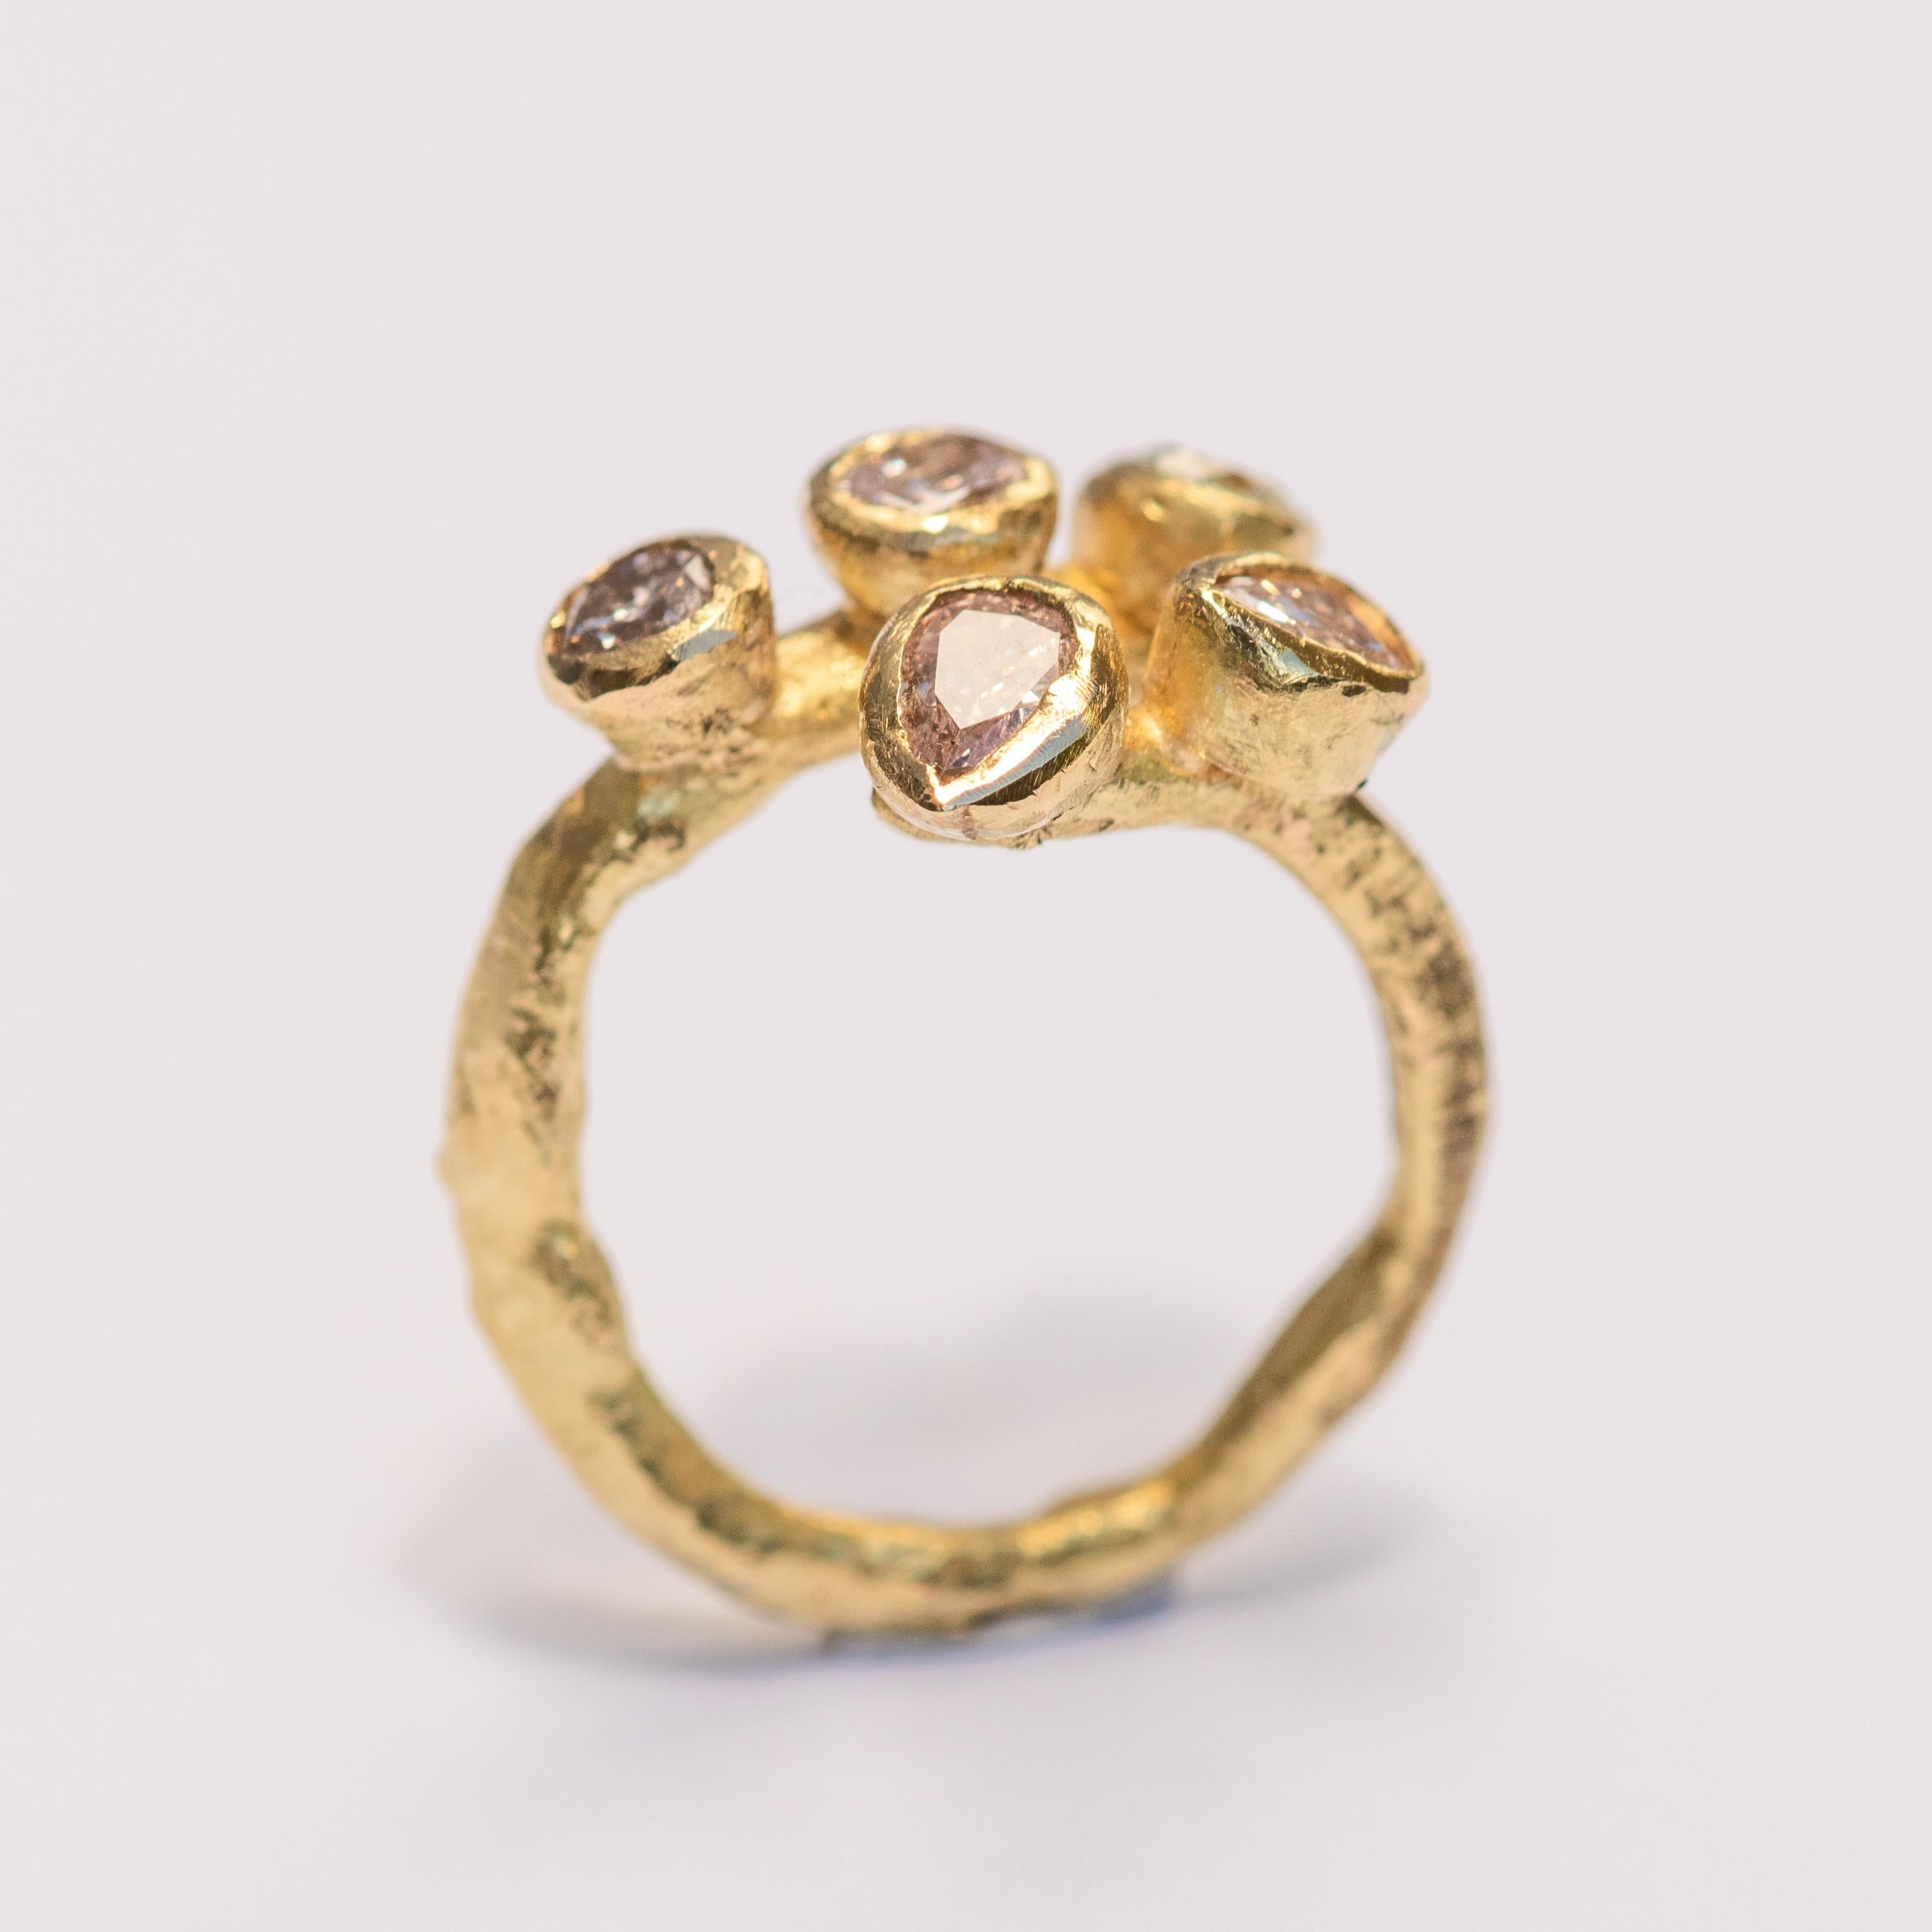 18k yellow gold textured open ring with five fancy coloured diamonds, various shapes and colours: 
x2 pear-shape pink 5mm x 4mm
x1 round green 4mm
x1 round pink 4mm
x1 round grey 4mm

This is a fabulous alternative bridal ring or a sparkling